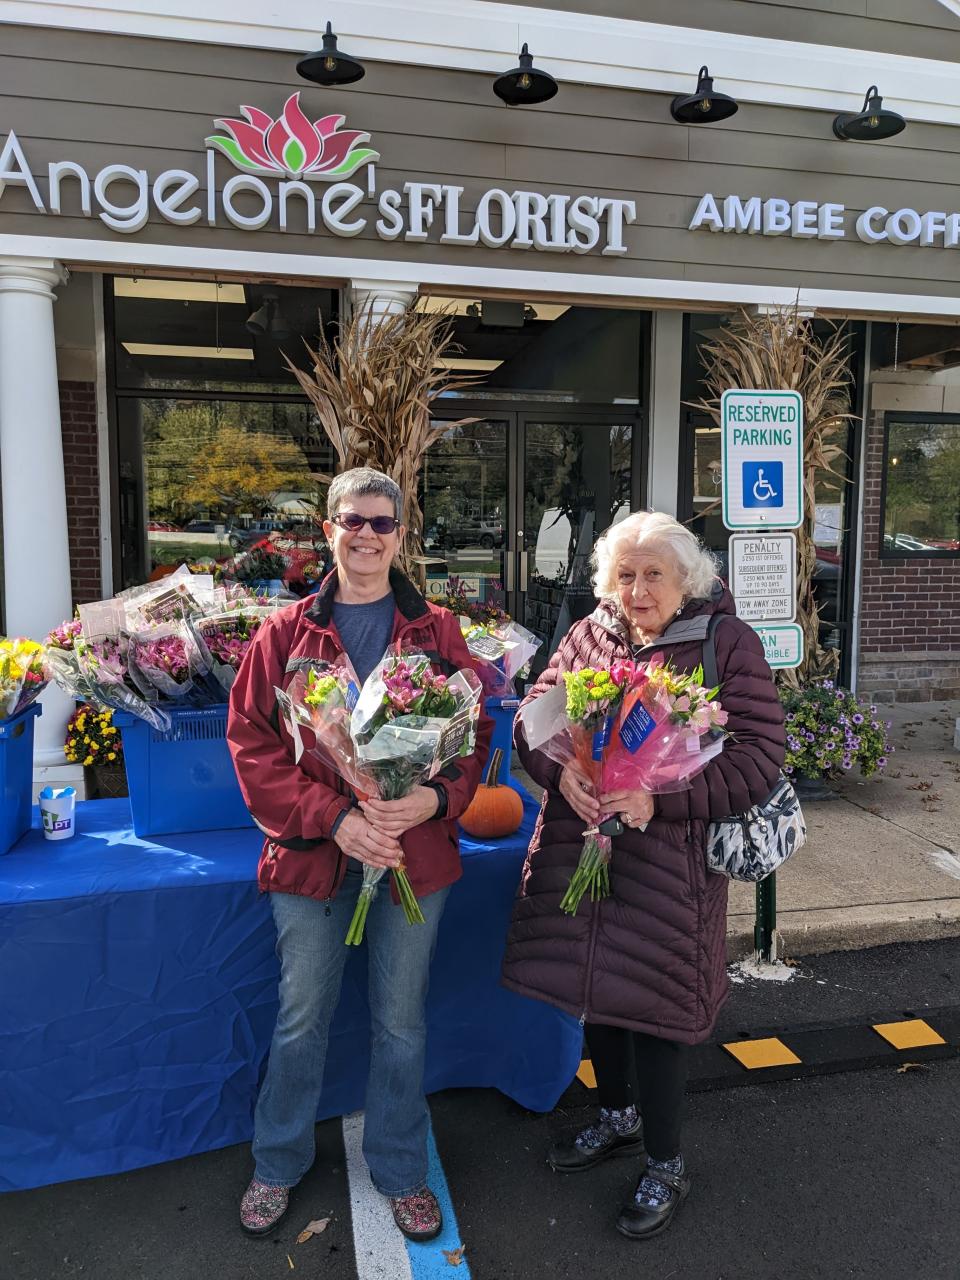 Angelone's staff will visit businesses in Raritan and Somerville Friday and hand out roses to women to mark International Women's Day.